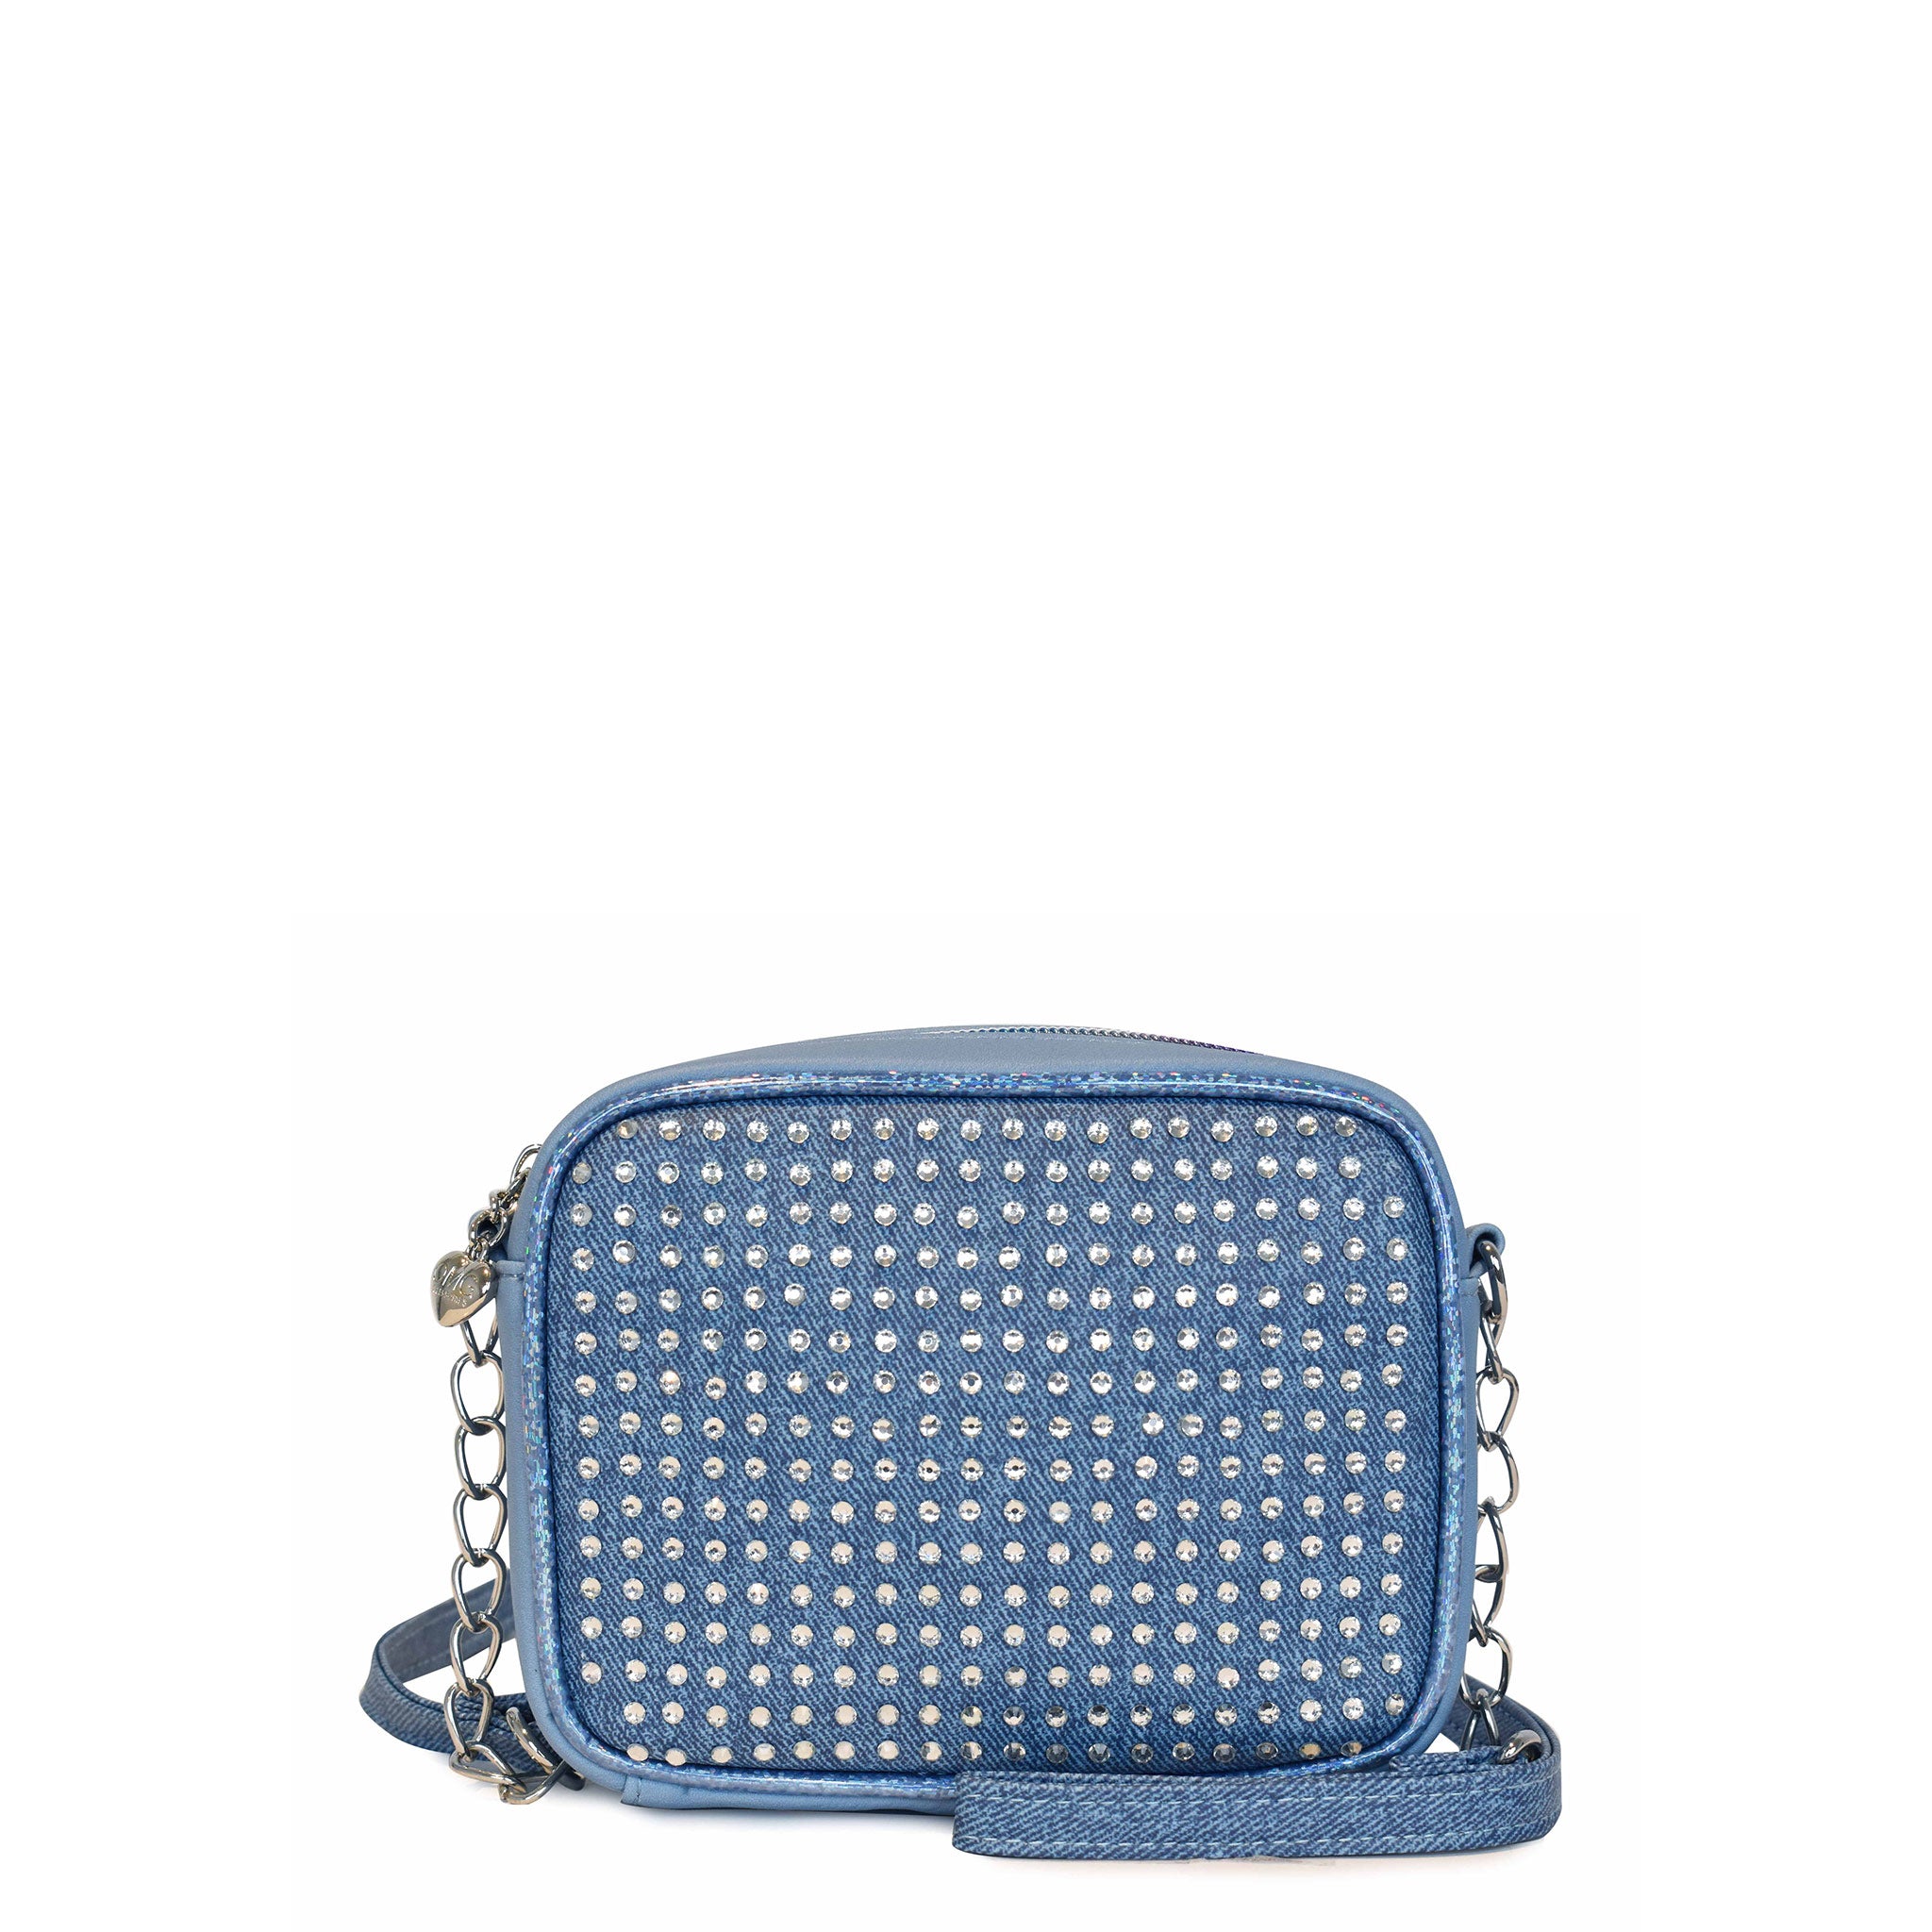 Front view of a denim rhinestone covered crossbody